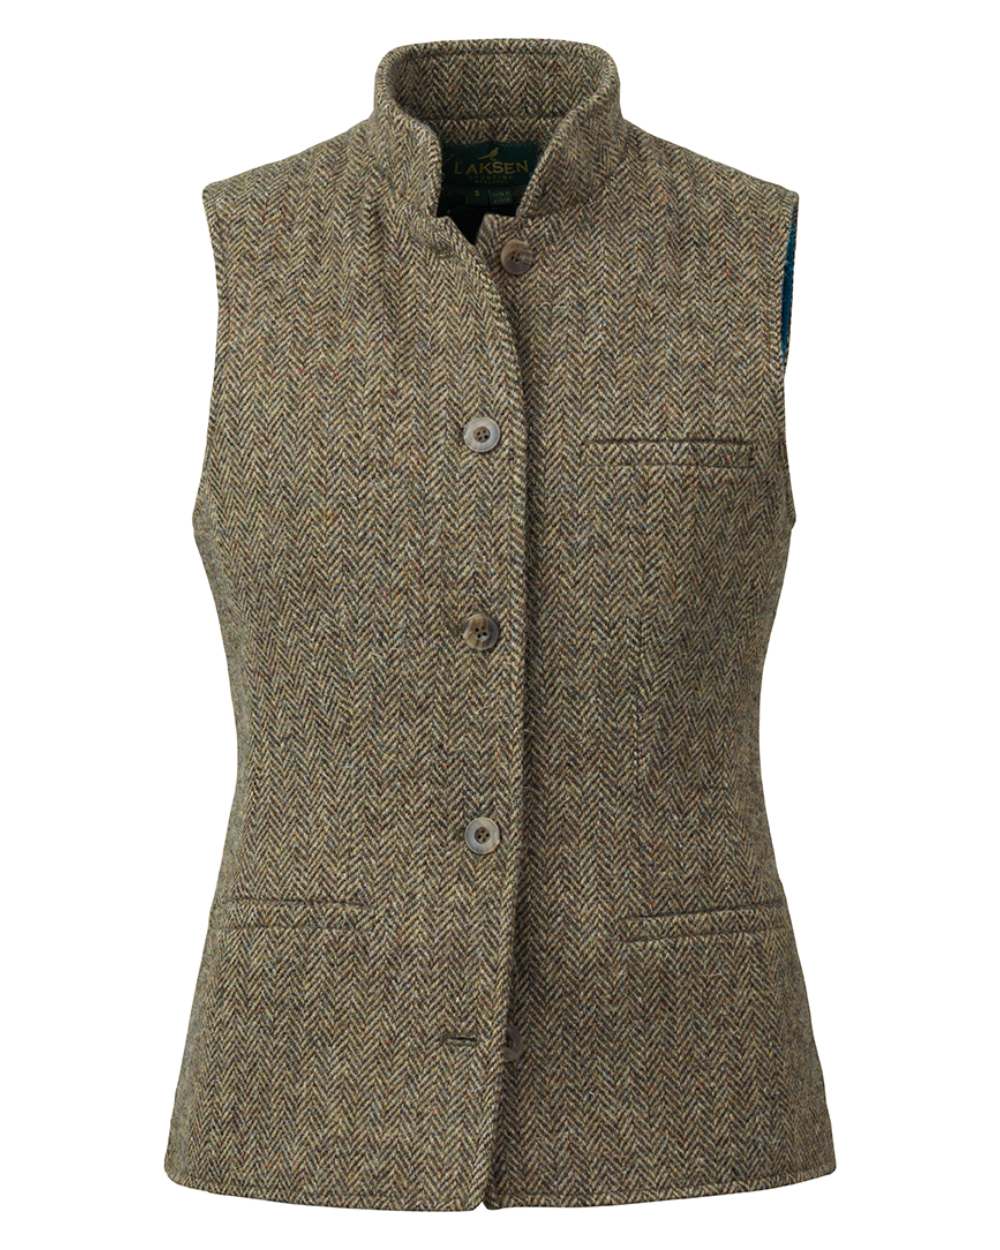 Laksen Hopnell Fife Tweed Vest On A White Background